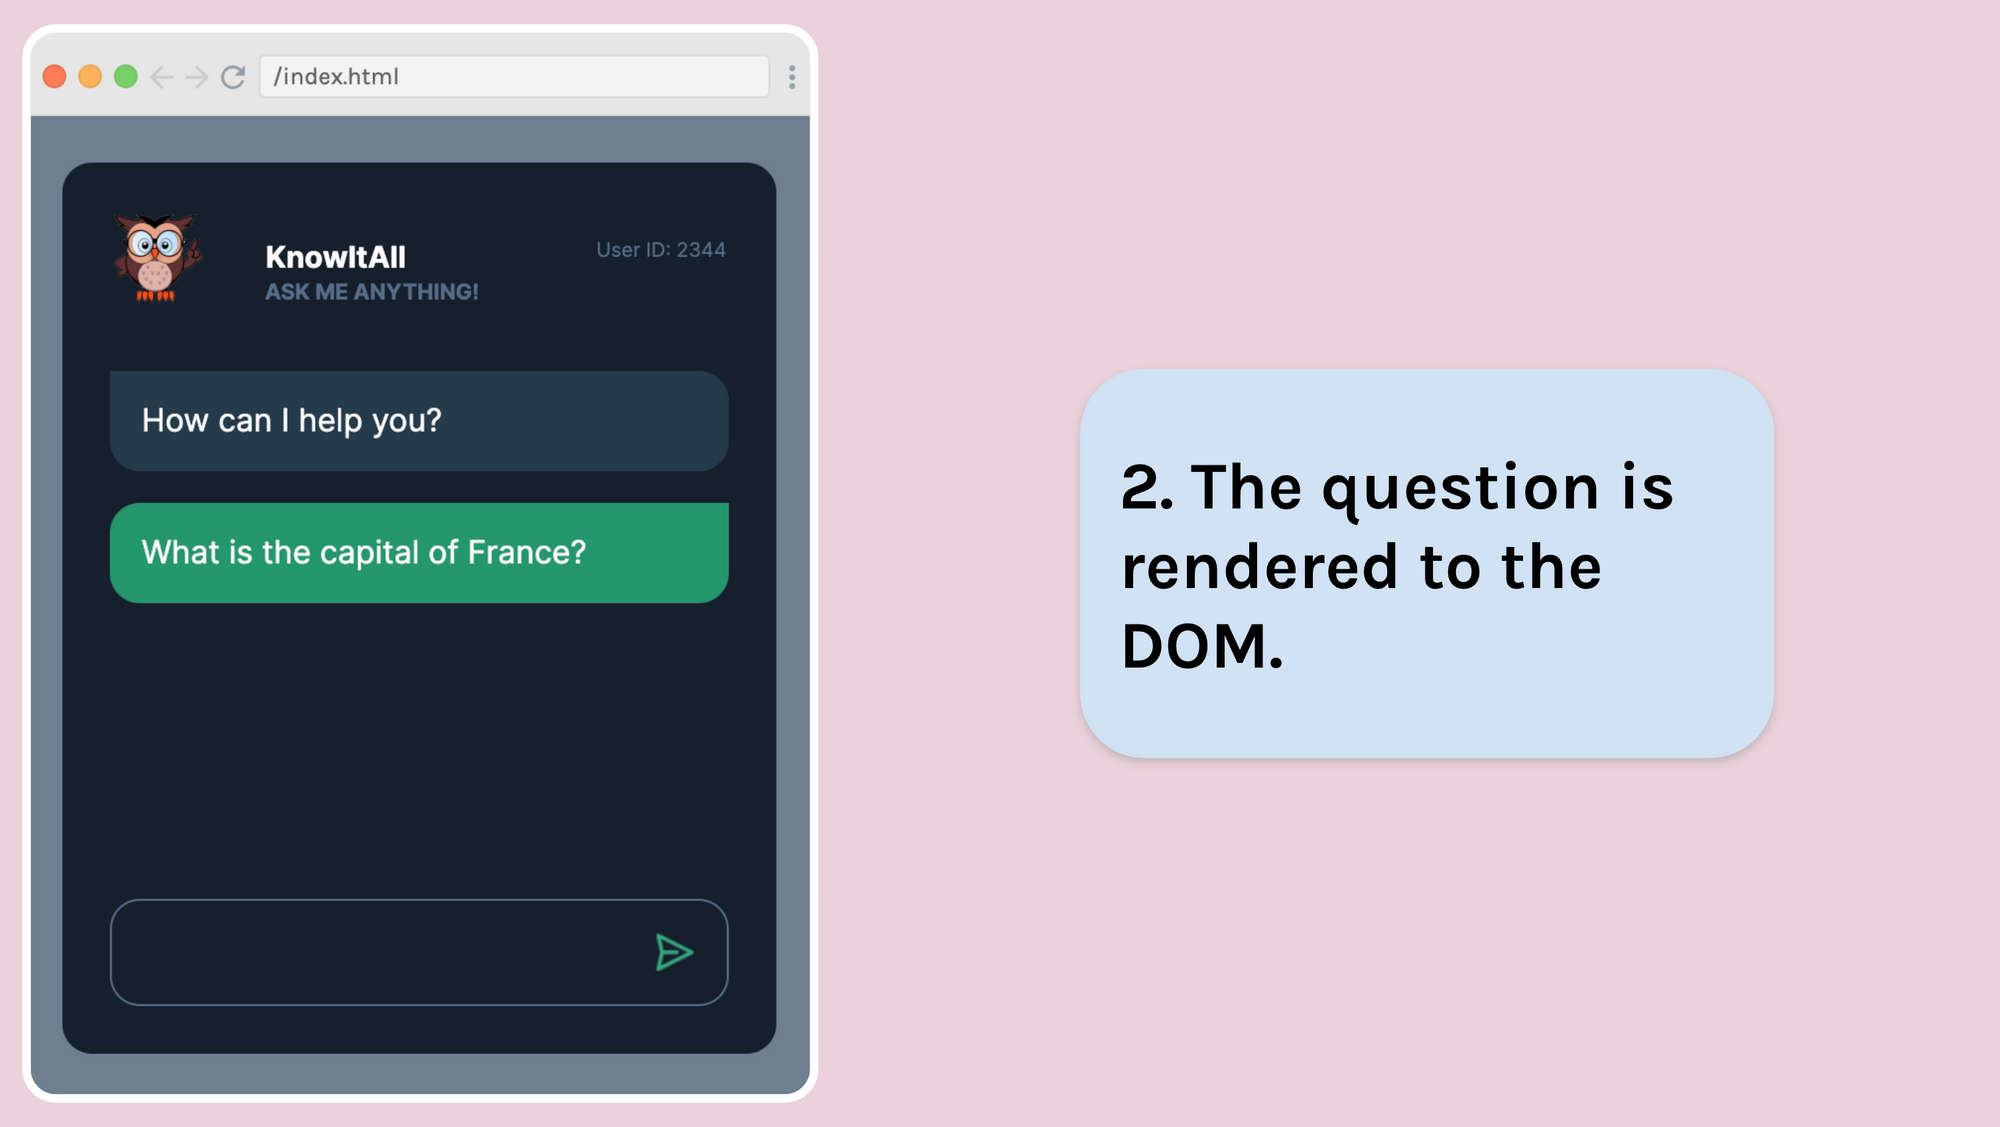 2. The question is rendered to the DOM.